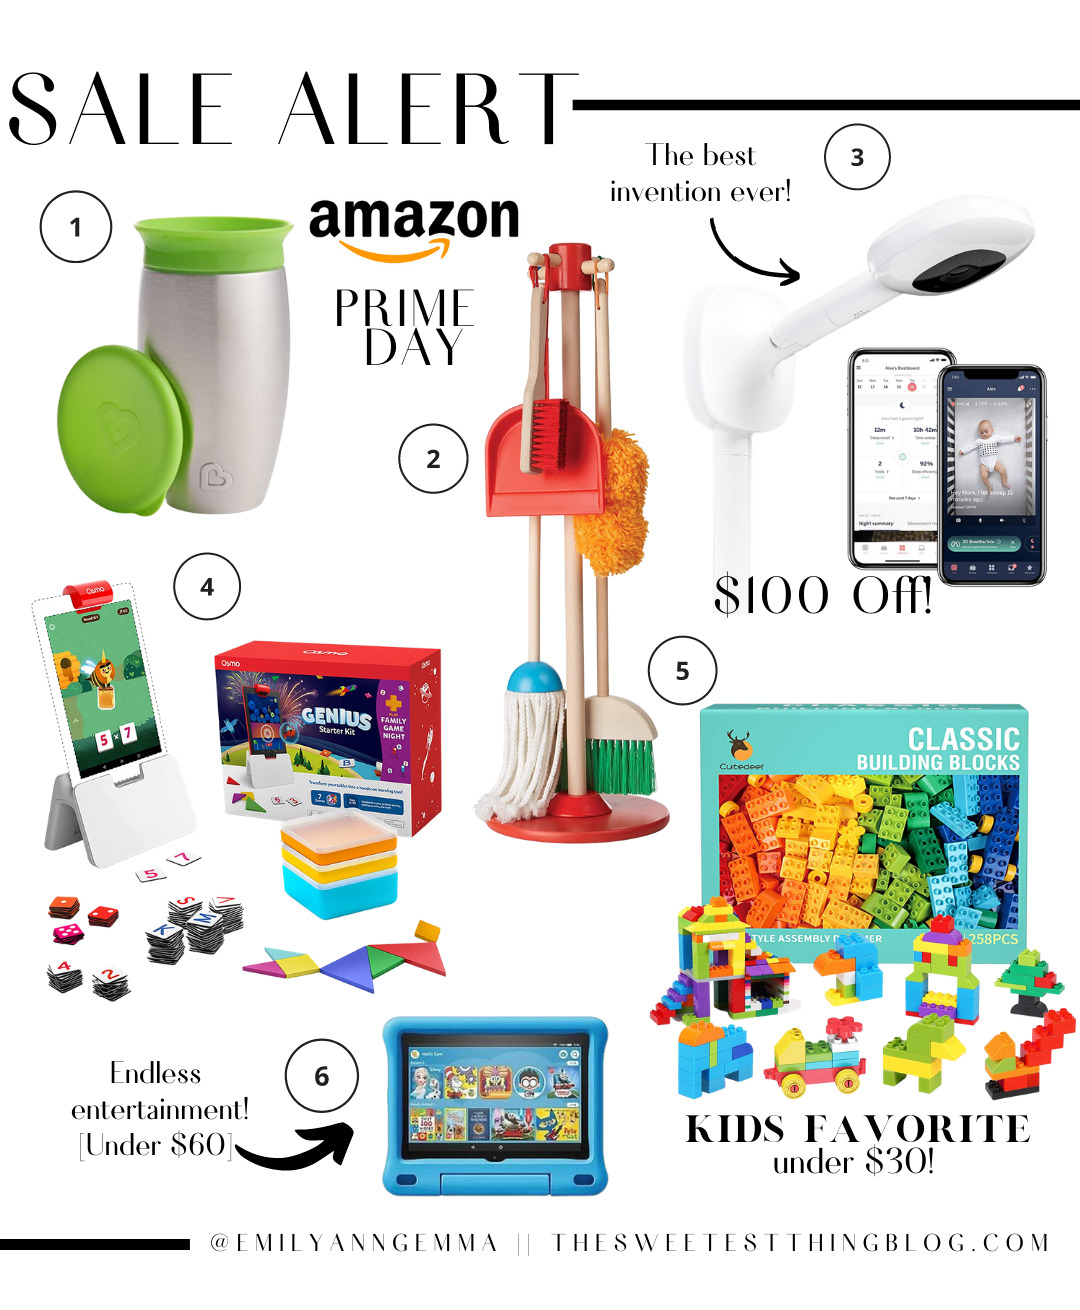 Amazon Prime Day by popular US life and Style blog, The Sweetest Thing: collage image of classic building blocks, Melissa and Doug cleaning playlet, Nanit pro baby monitor, Munchkin Stainless Steel sippy cup, Genius starter kit, and Amazon fire kindle. 